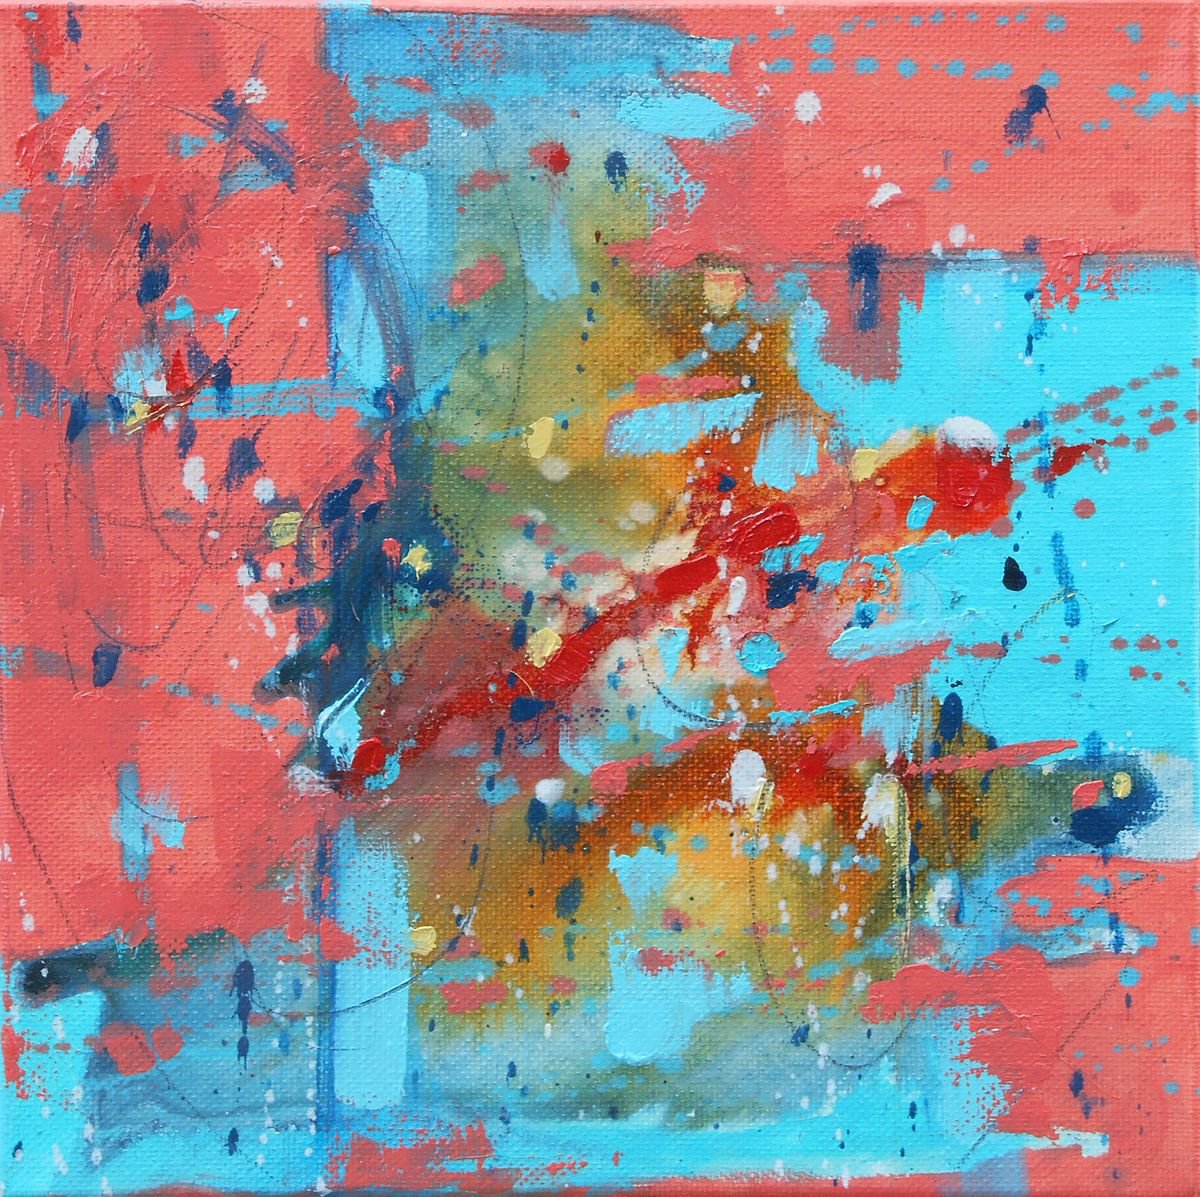 Miami Nights - Abstract Art - 8 x 8 IN / 20 x 20 CM - Abstract Oil Painting on Canvas by Cynthia Ligeros